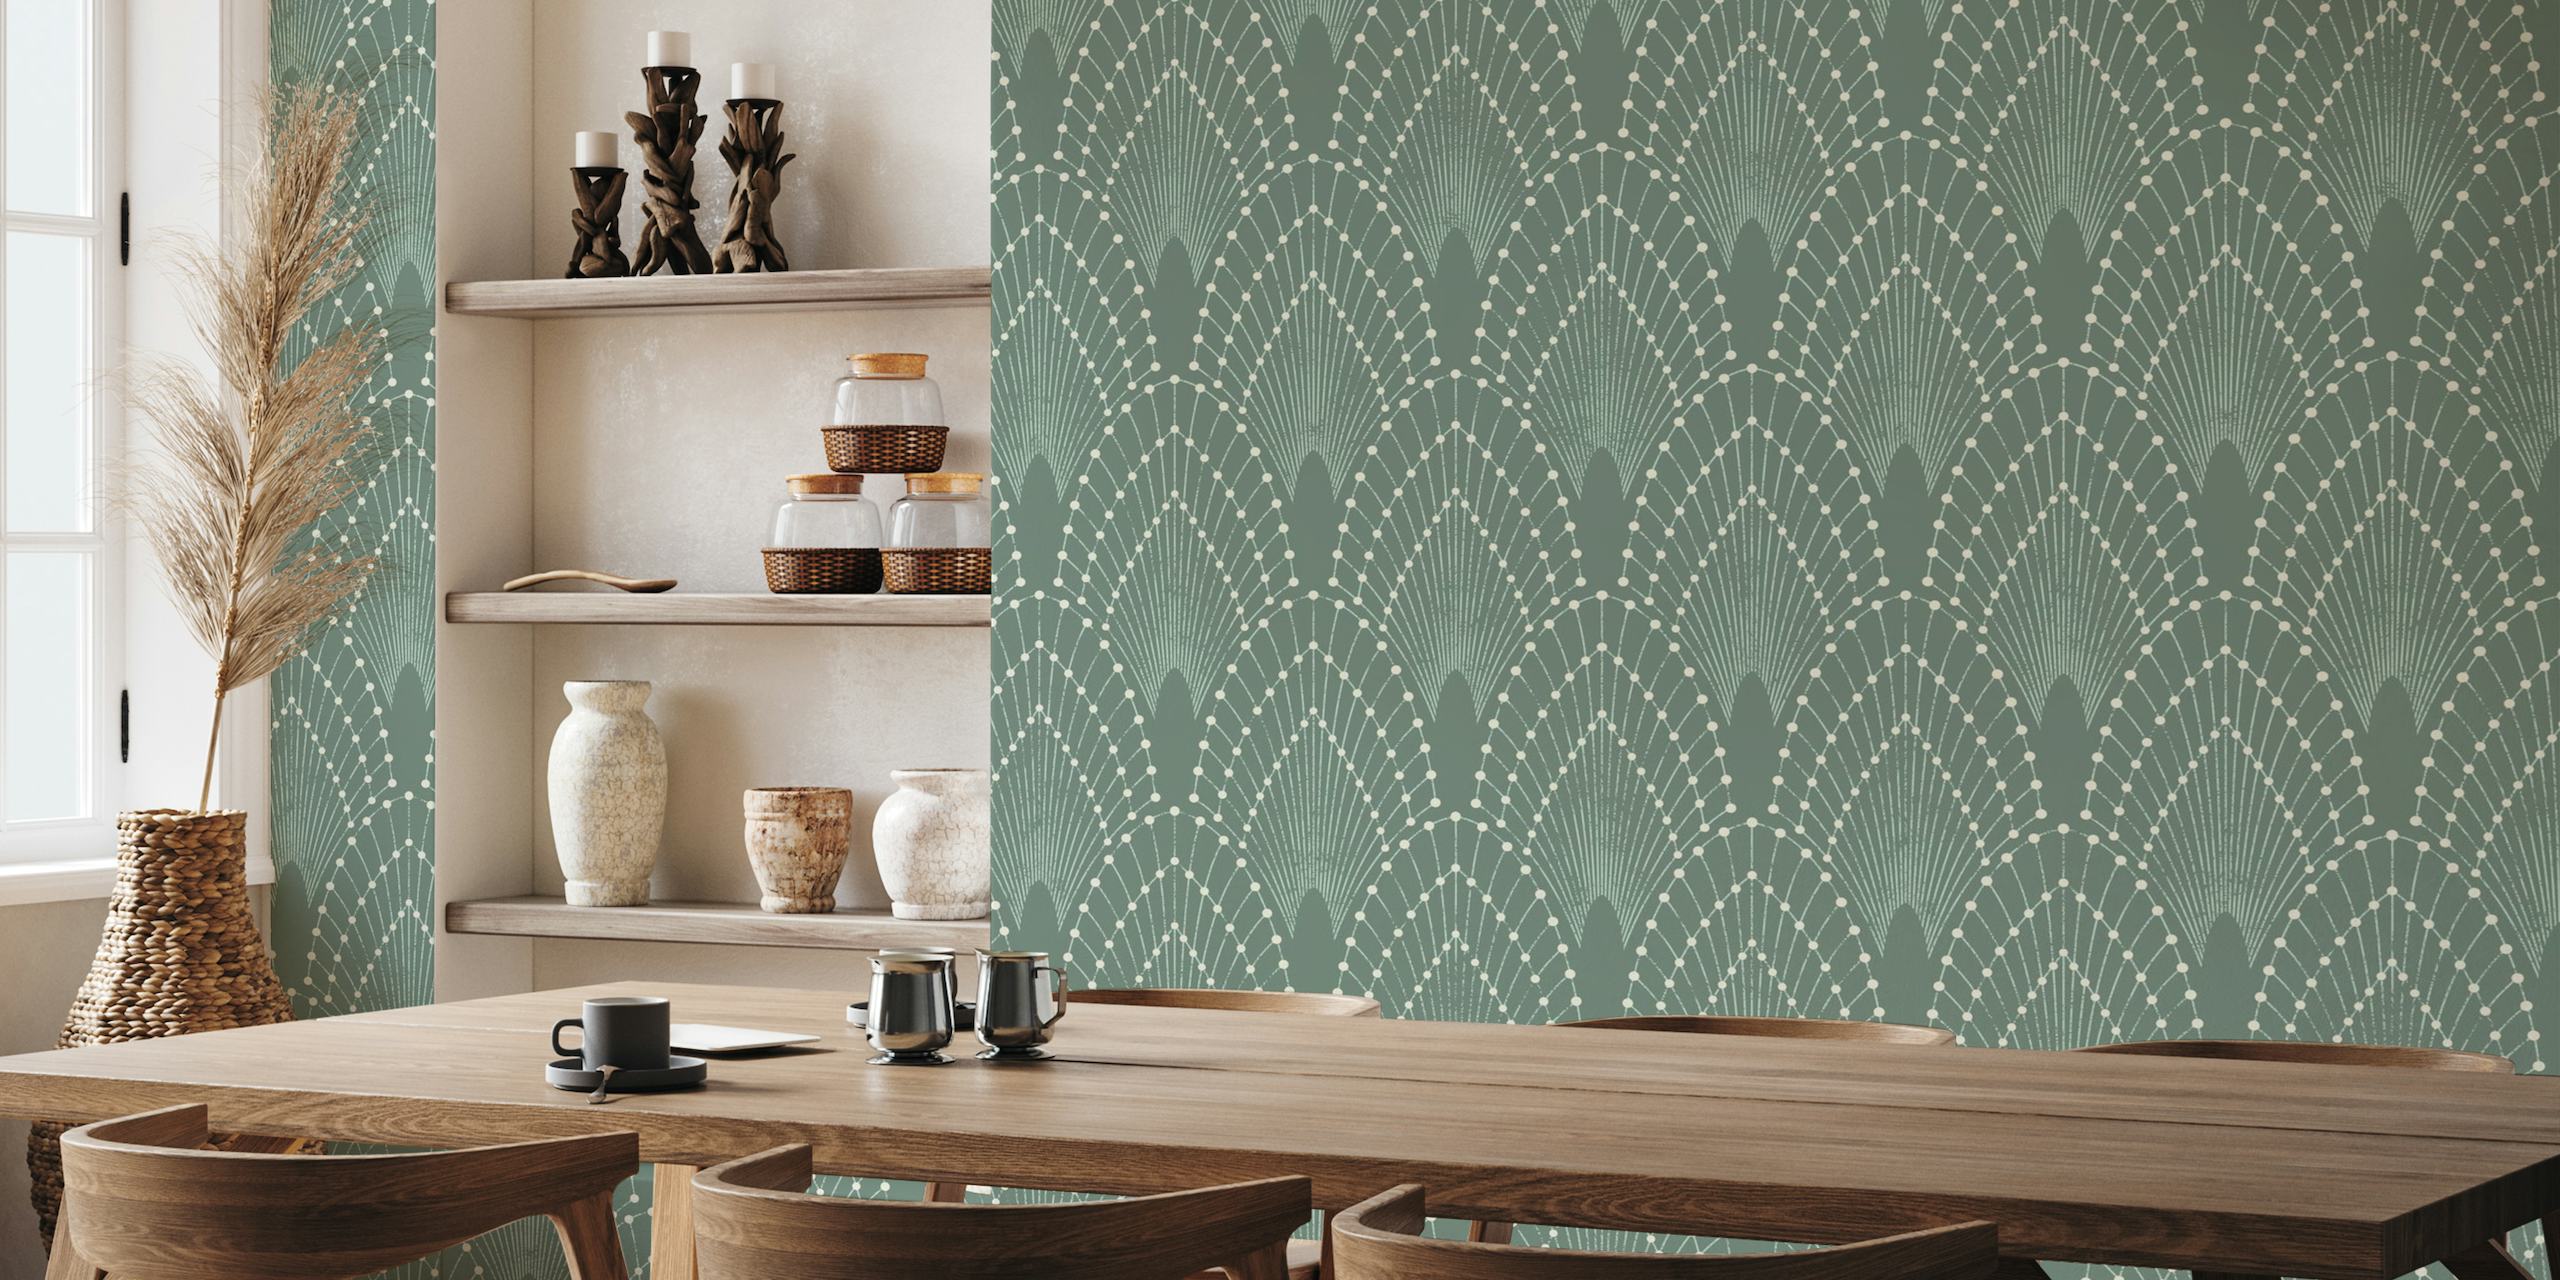 Elegant Art Deco style wall mural in sage green with geometric patterns.